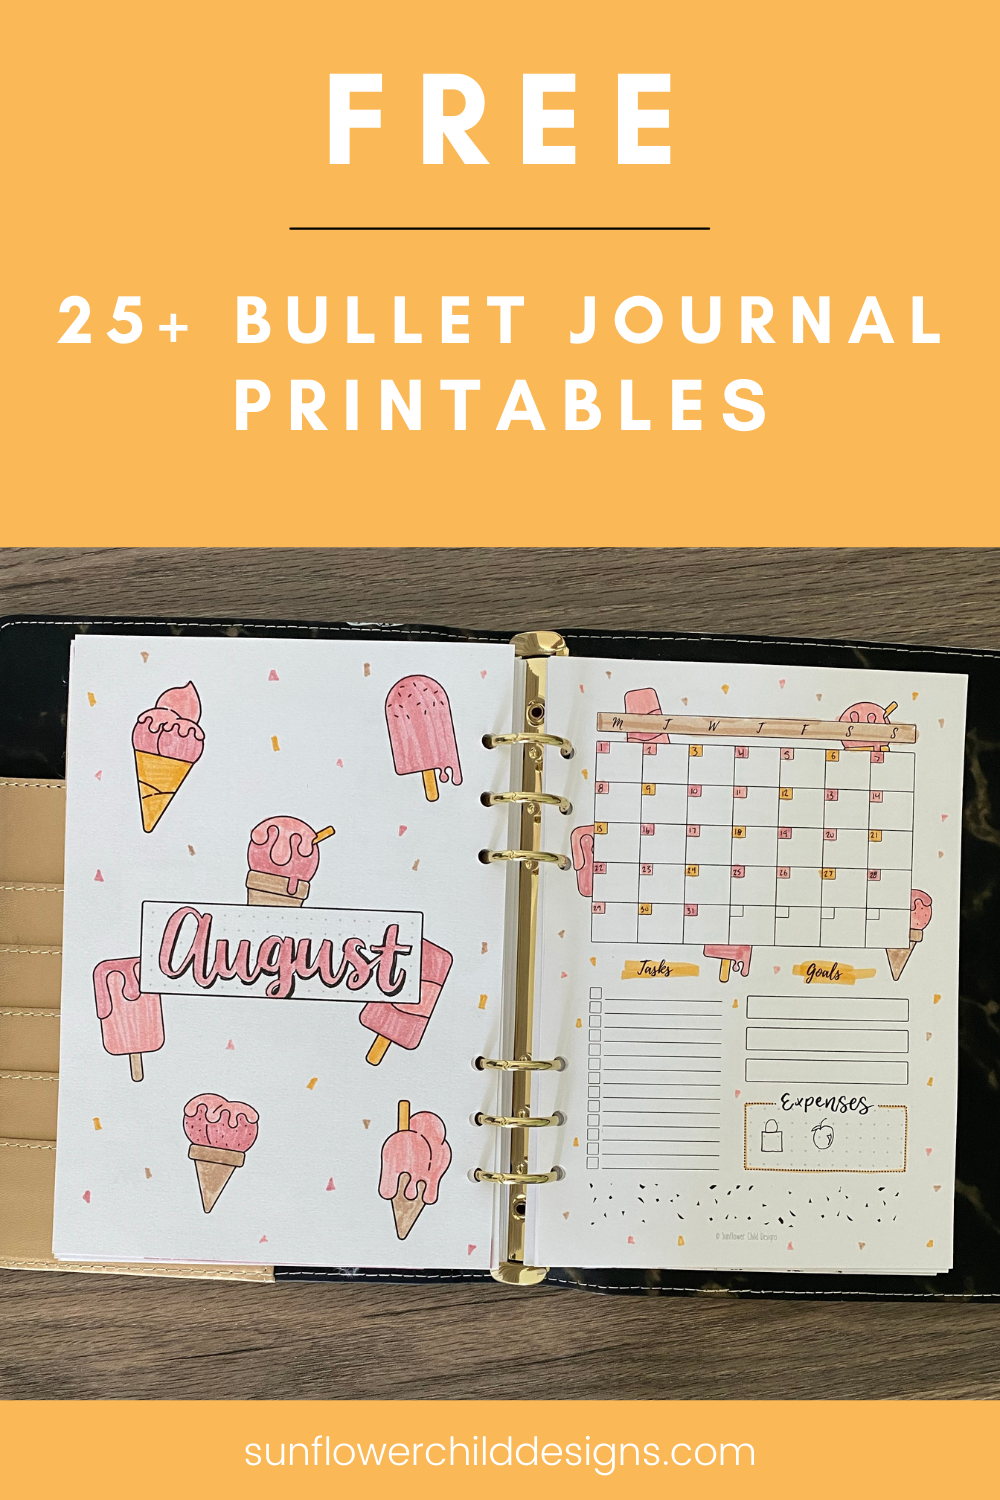 Your Bullet Journaling Beliefs Challenged: These Printables Aren't Childish!